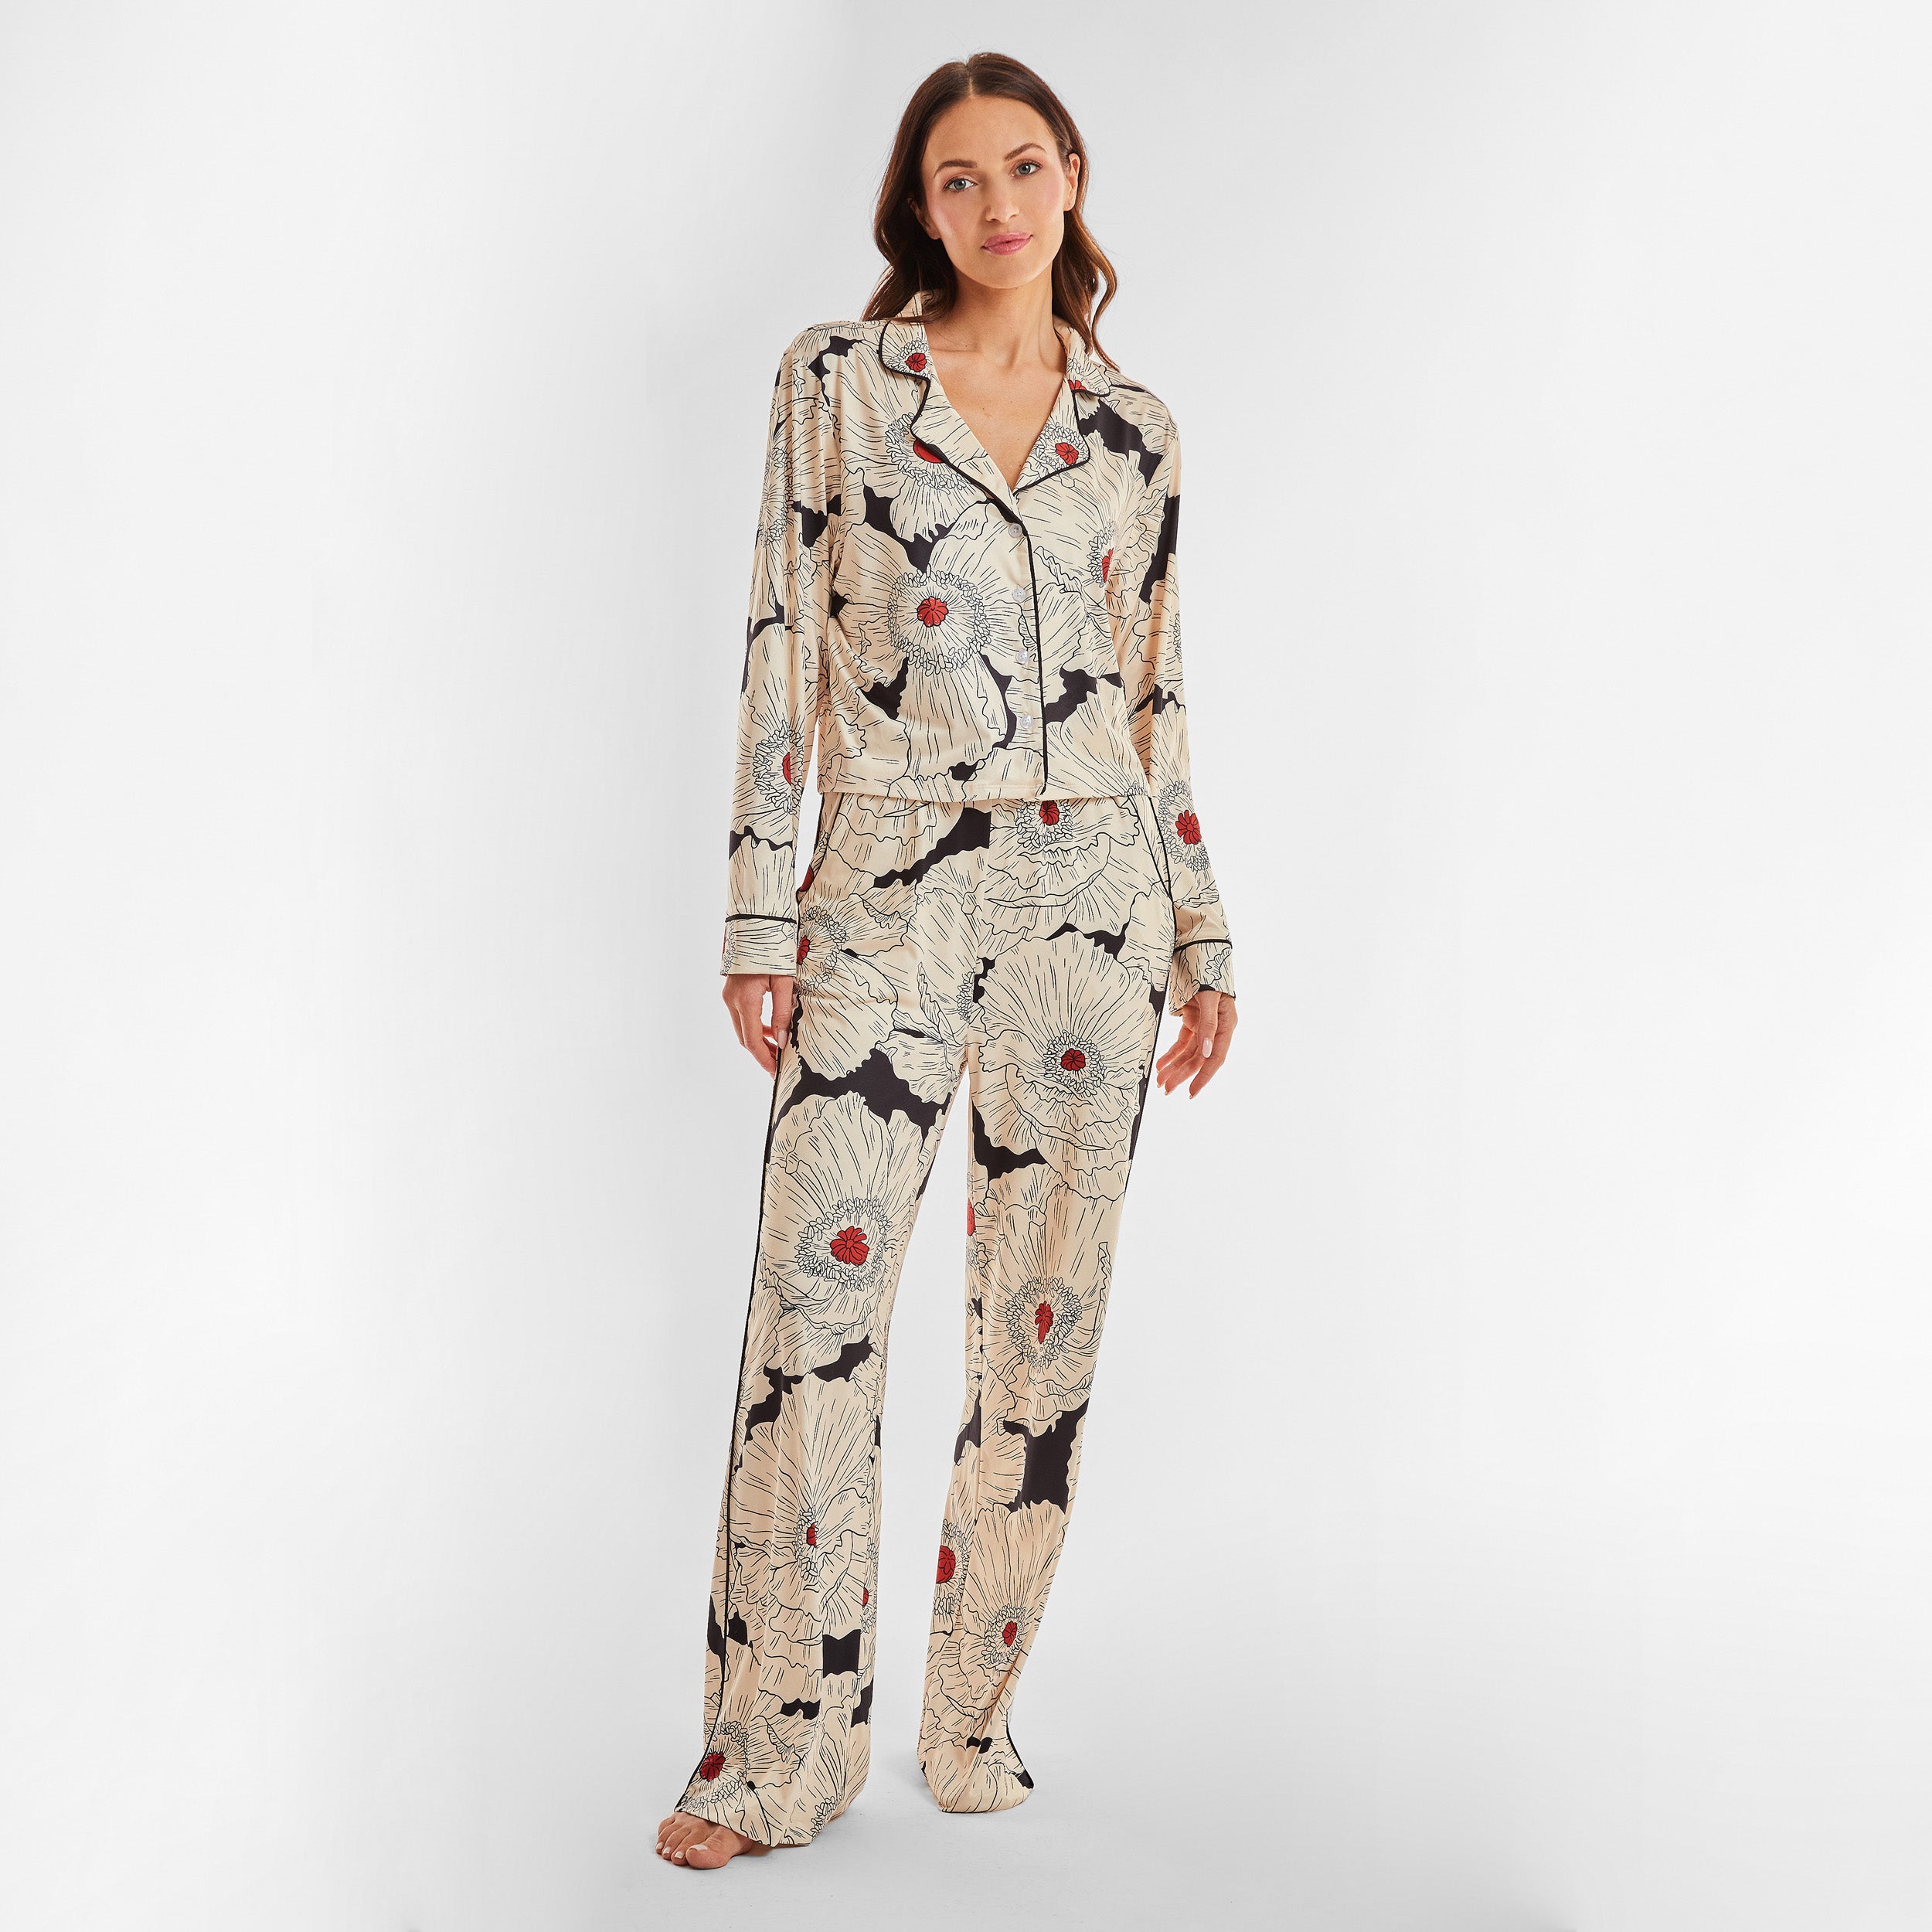 Front view of woman wearing breathable, relaxed and buttery smooth pajama shirt featuring a button front top with notch collar and Poppy Floral print.